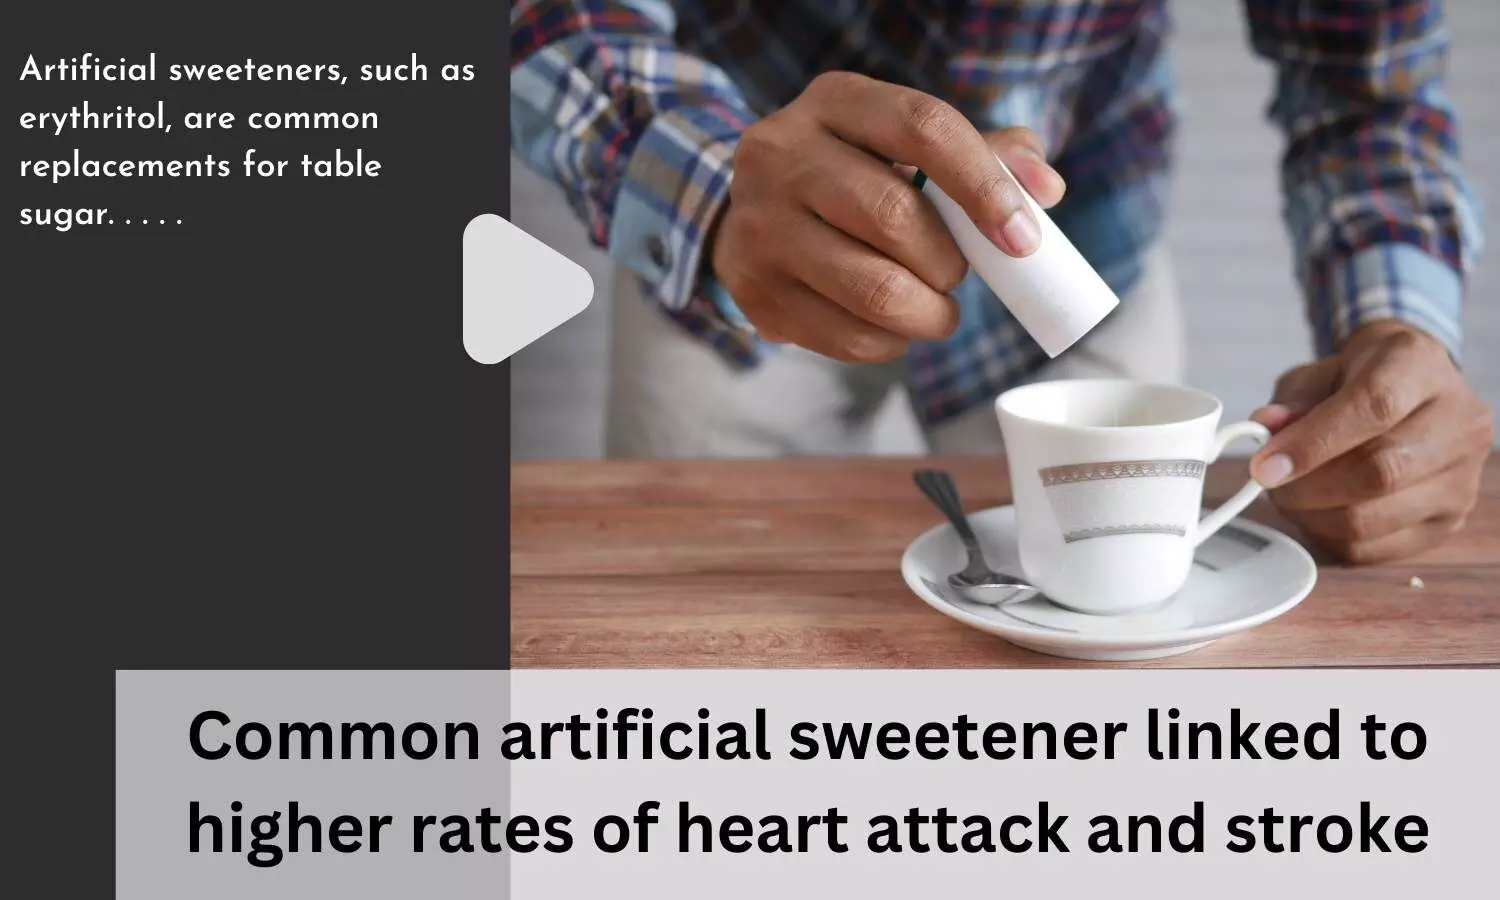 Common artificial sweetener linked to higher rates of heart attack and stroke